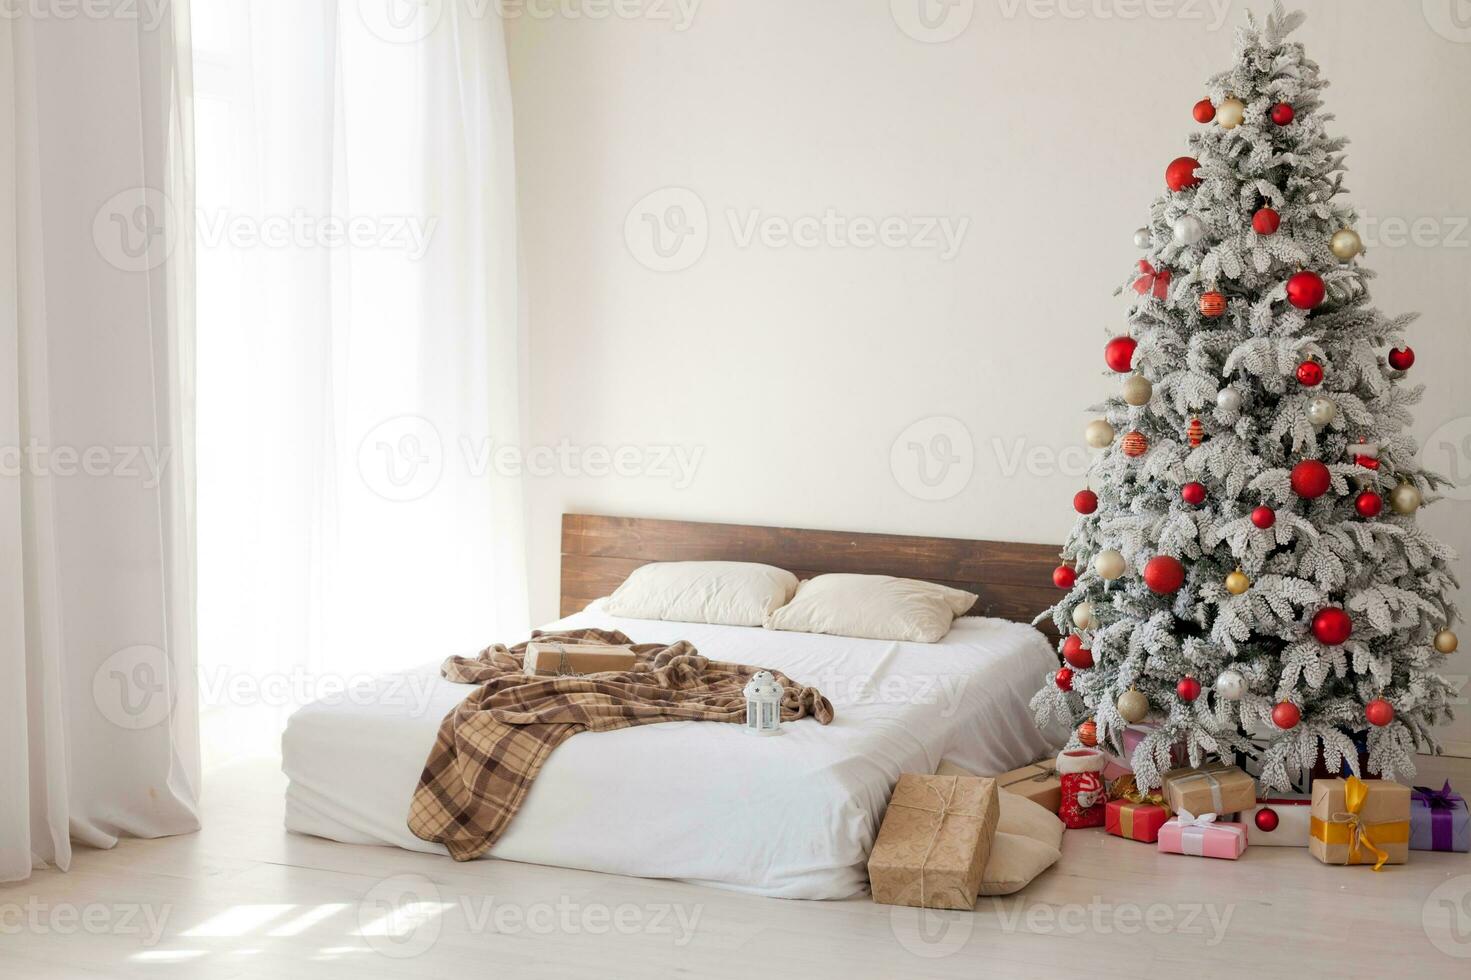 Christmas interior stock photos. Explore warm and inviting holiday themed home settings, adorned with twinkling lights, stockings, and beautifully decorated Christmas trees. photo